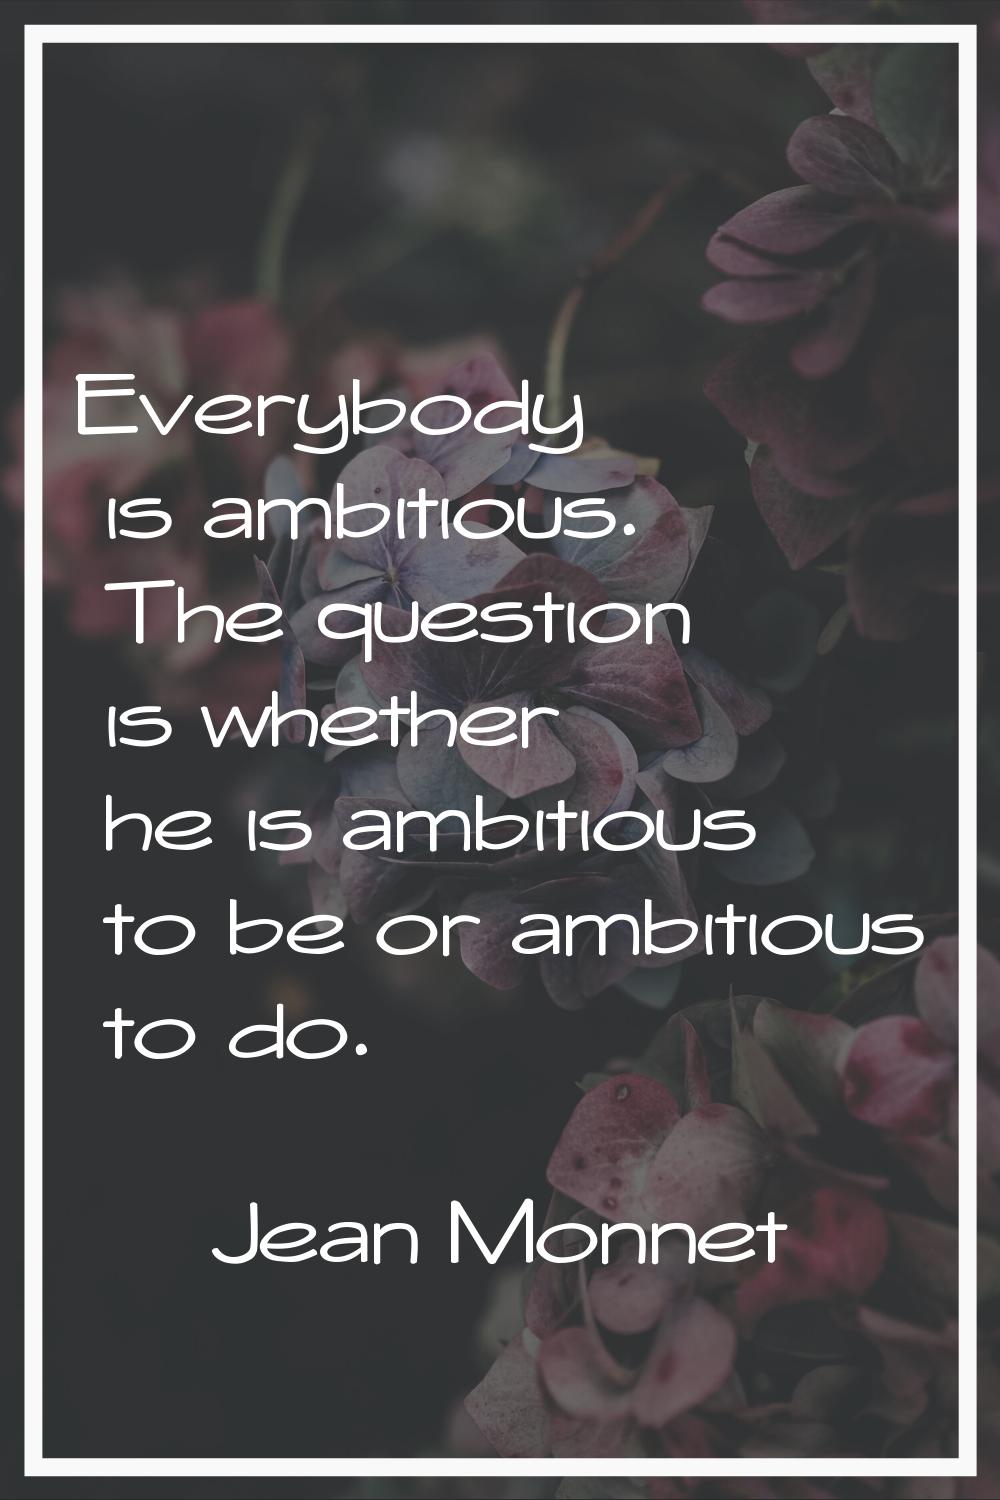 Everybody is ambitious. The question is whether he is ambitious to be or ambitious to do.